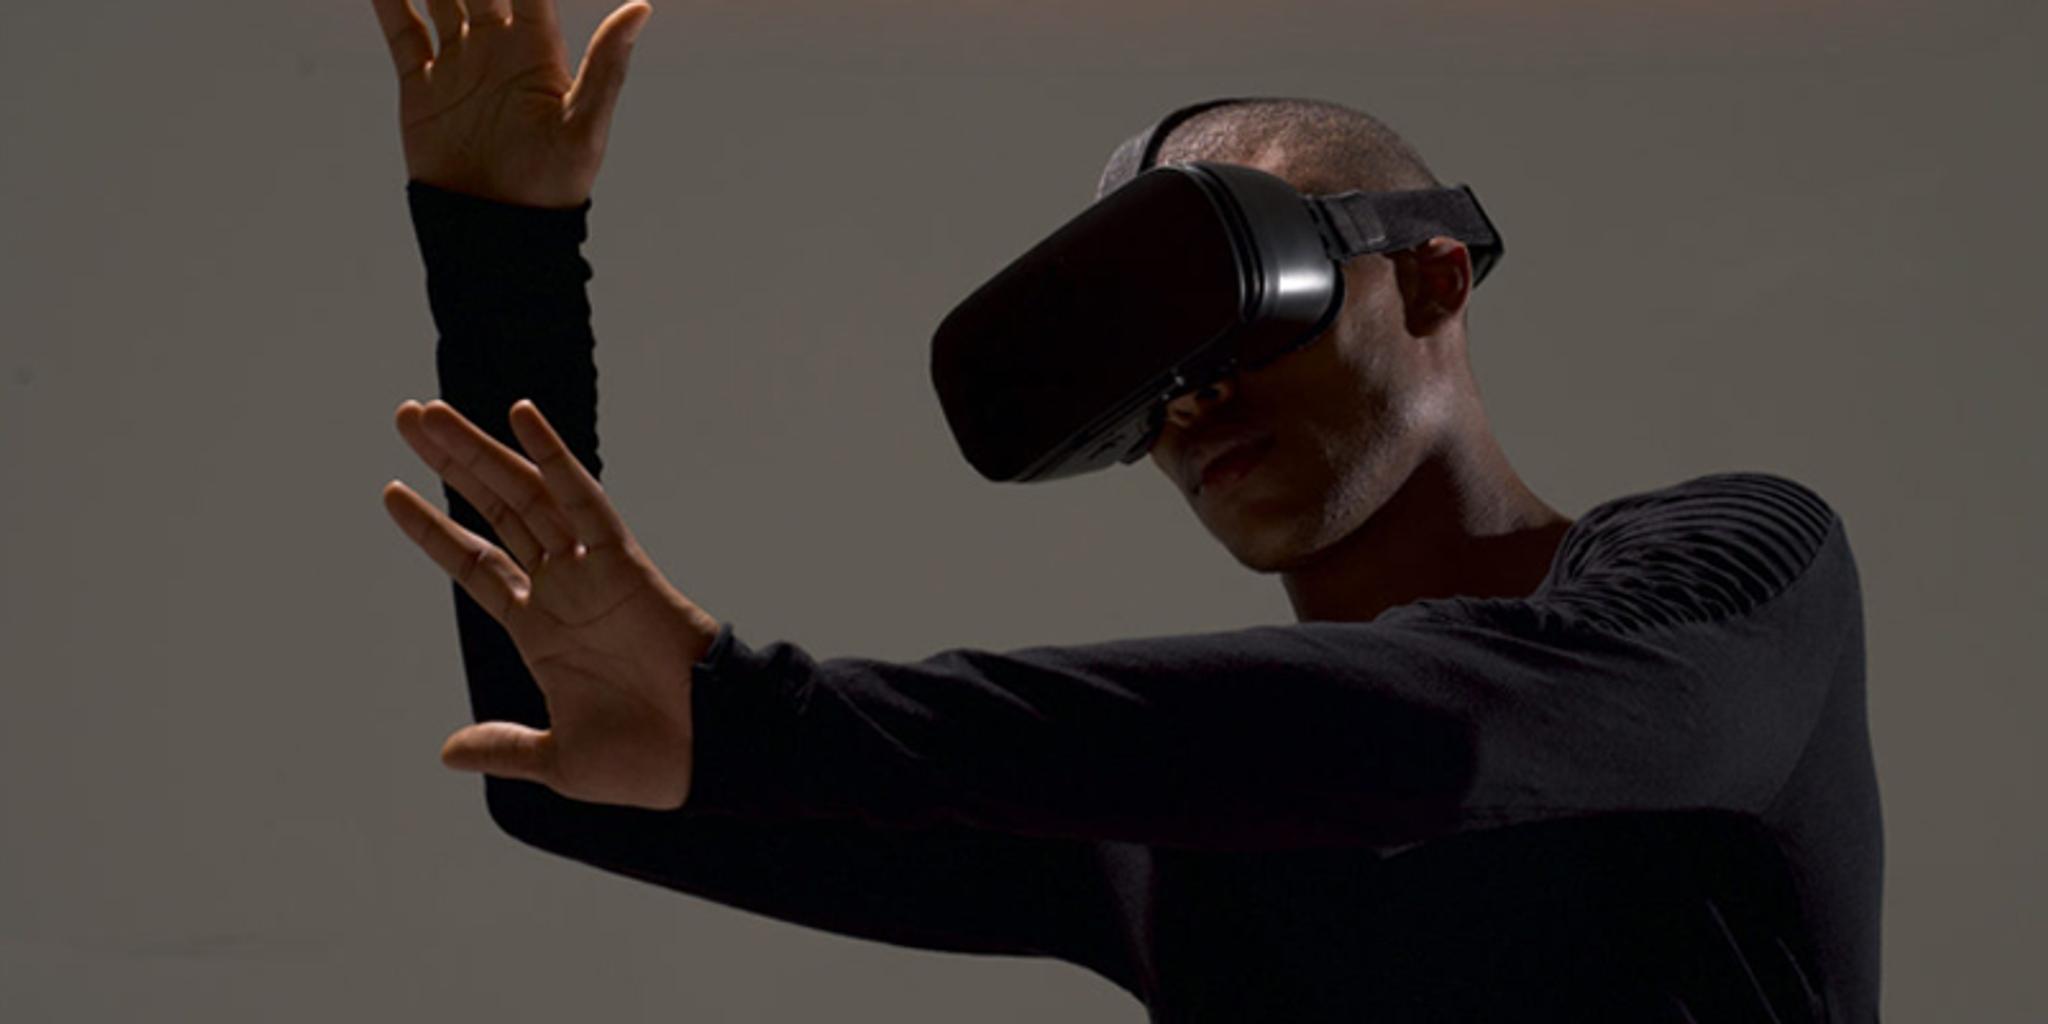 A man reaches out, mime-like in front of him. He is wearing VR glasses and is photographed on a grey background.